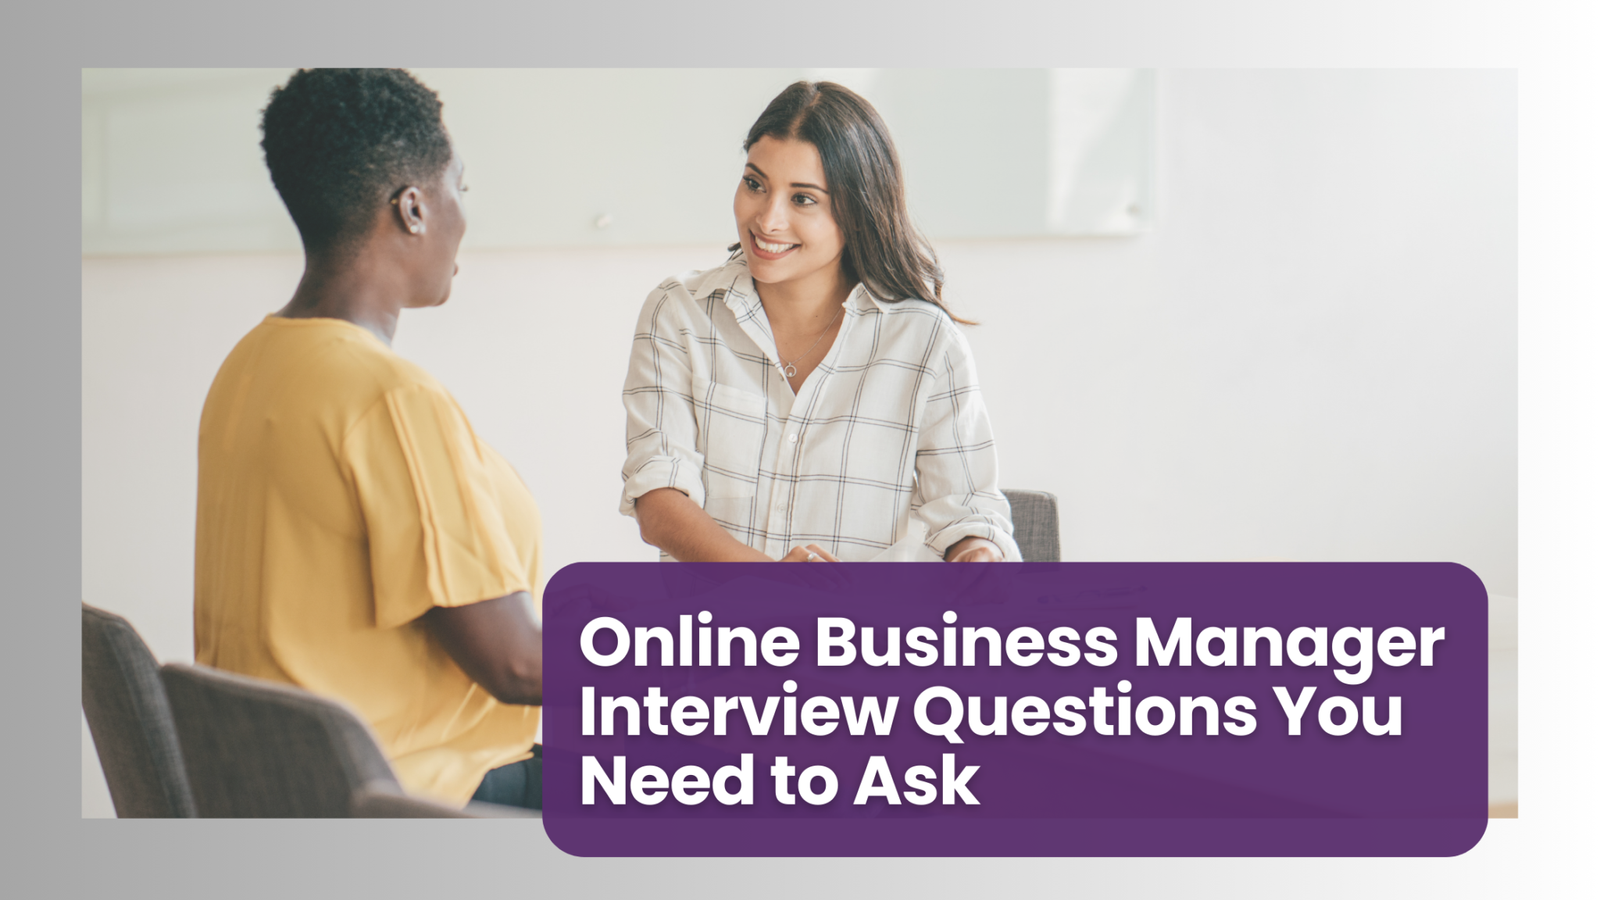 Featured image for “Online Business Manager Interview Questions You Need to Ask”